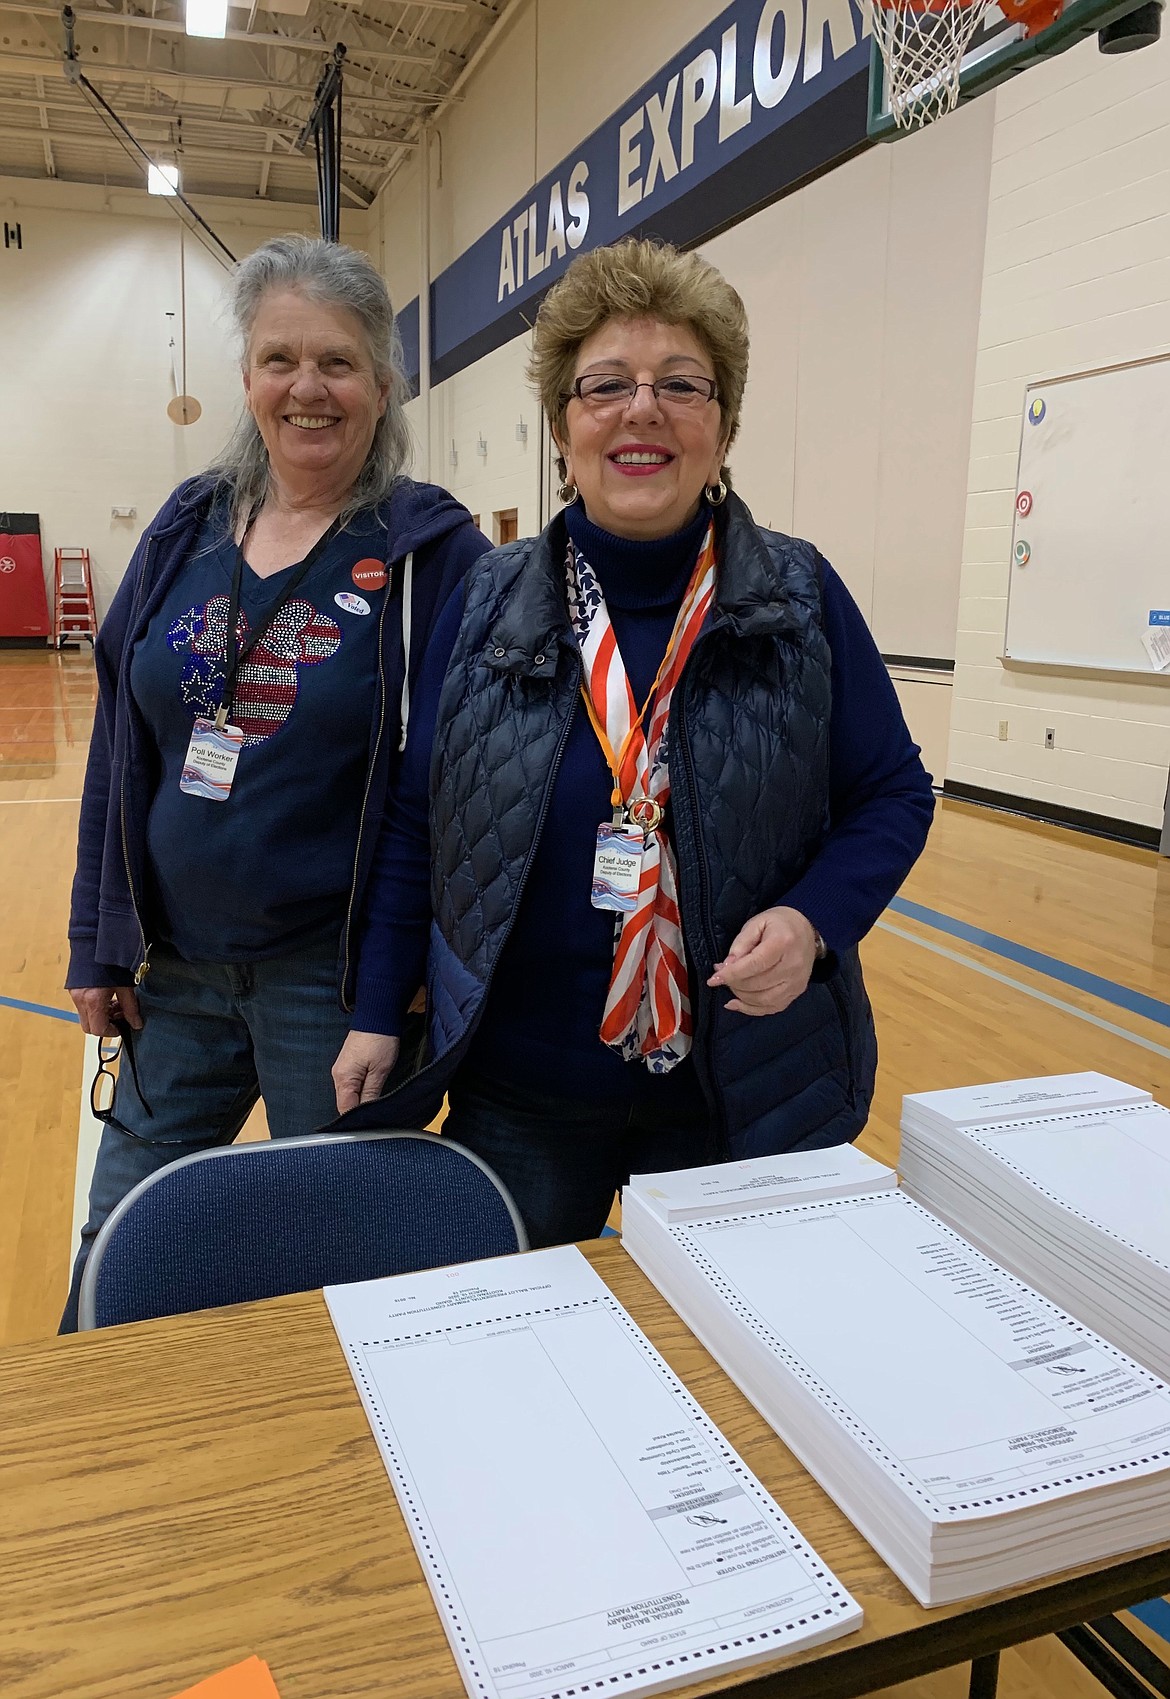 Beverly Guenette, chief judge, deputy of elections, right, and Mary Beth Bowen, poll worker, handing out ballots at precinct 18 during the election Tuesday, March 10. (ELENA JOHNSON)